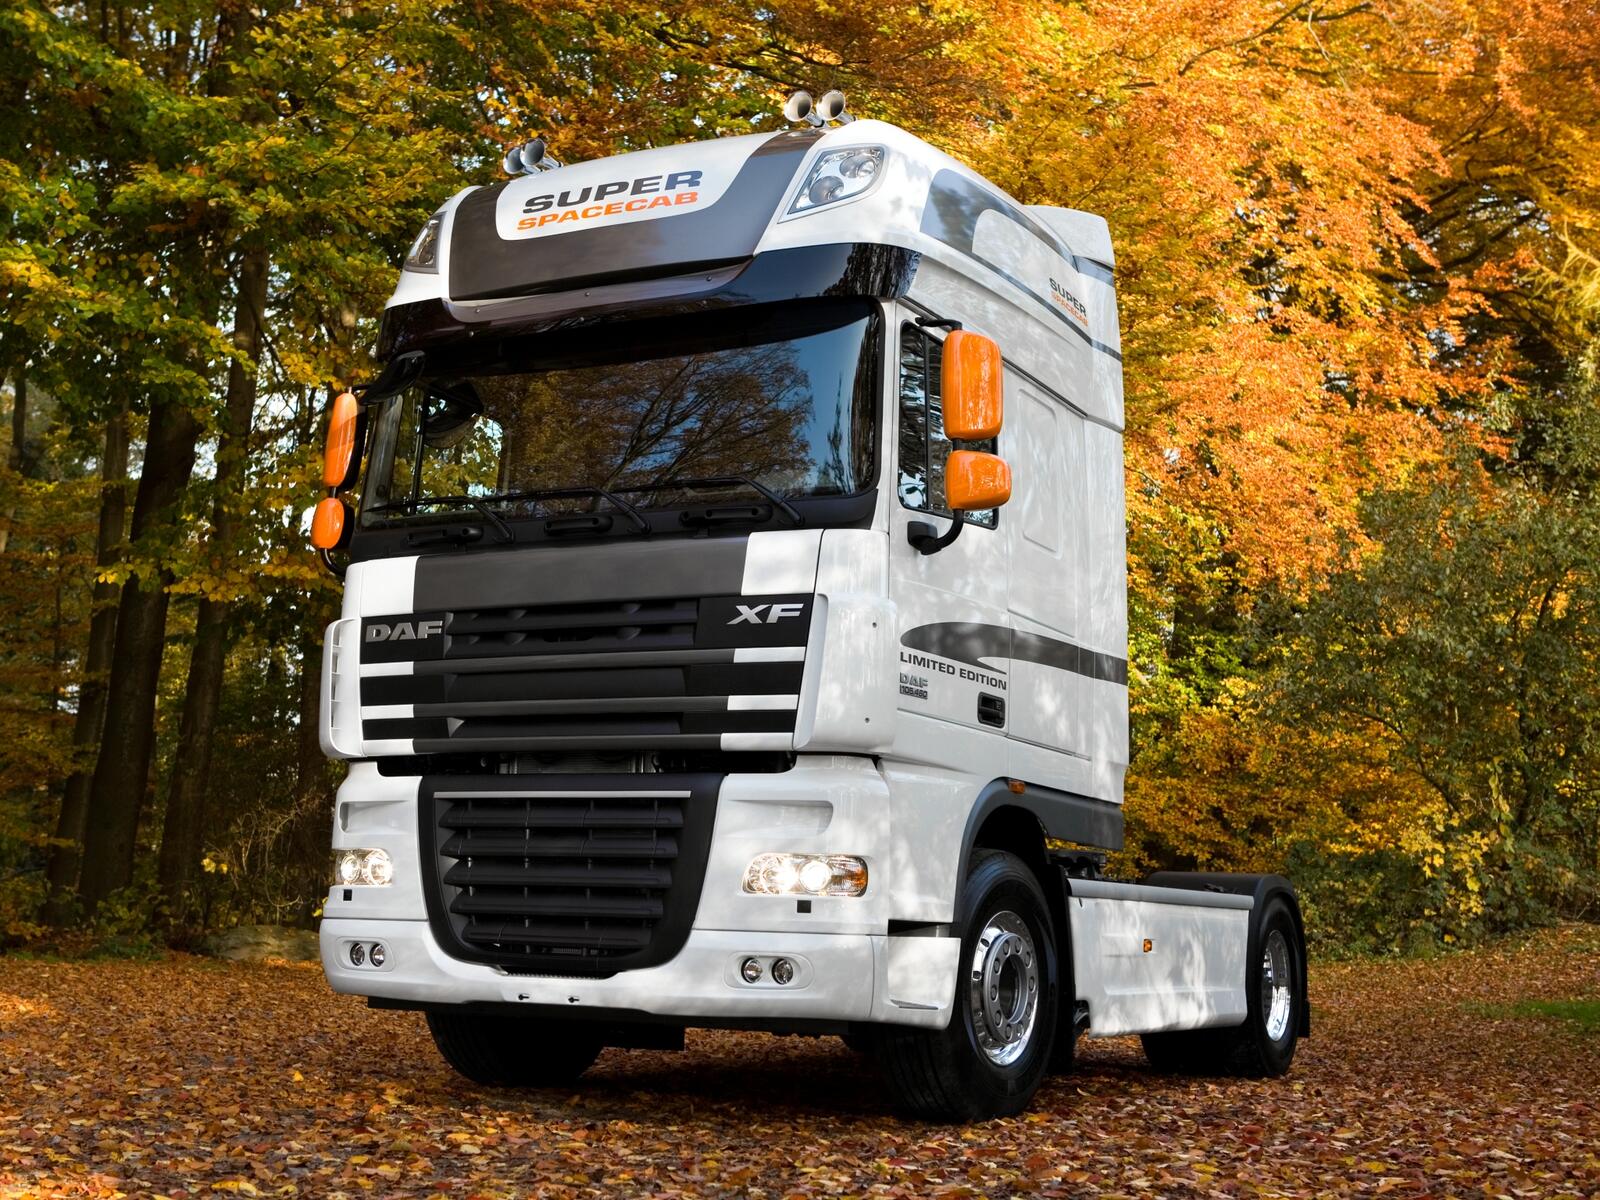 Wallpapers daf xf waggon without a trailer on the desktop